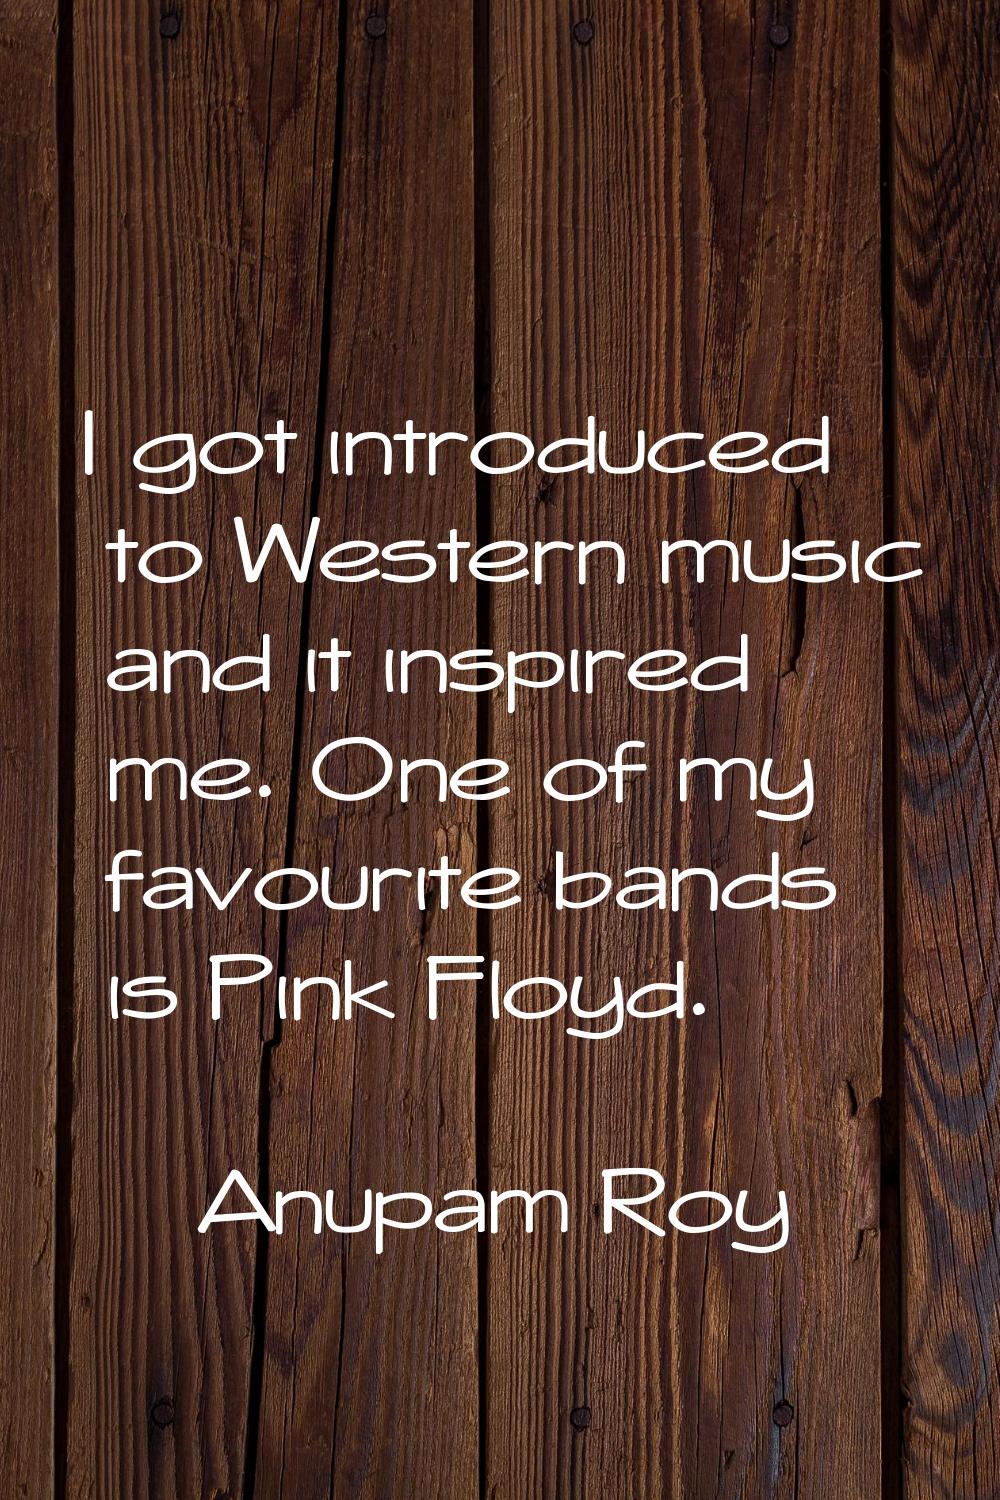 I got introduced to Western music and it inspired me. One of my favourite bands is Pink Floyd.